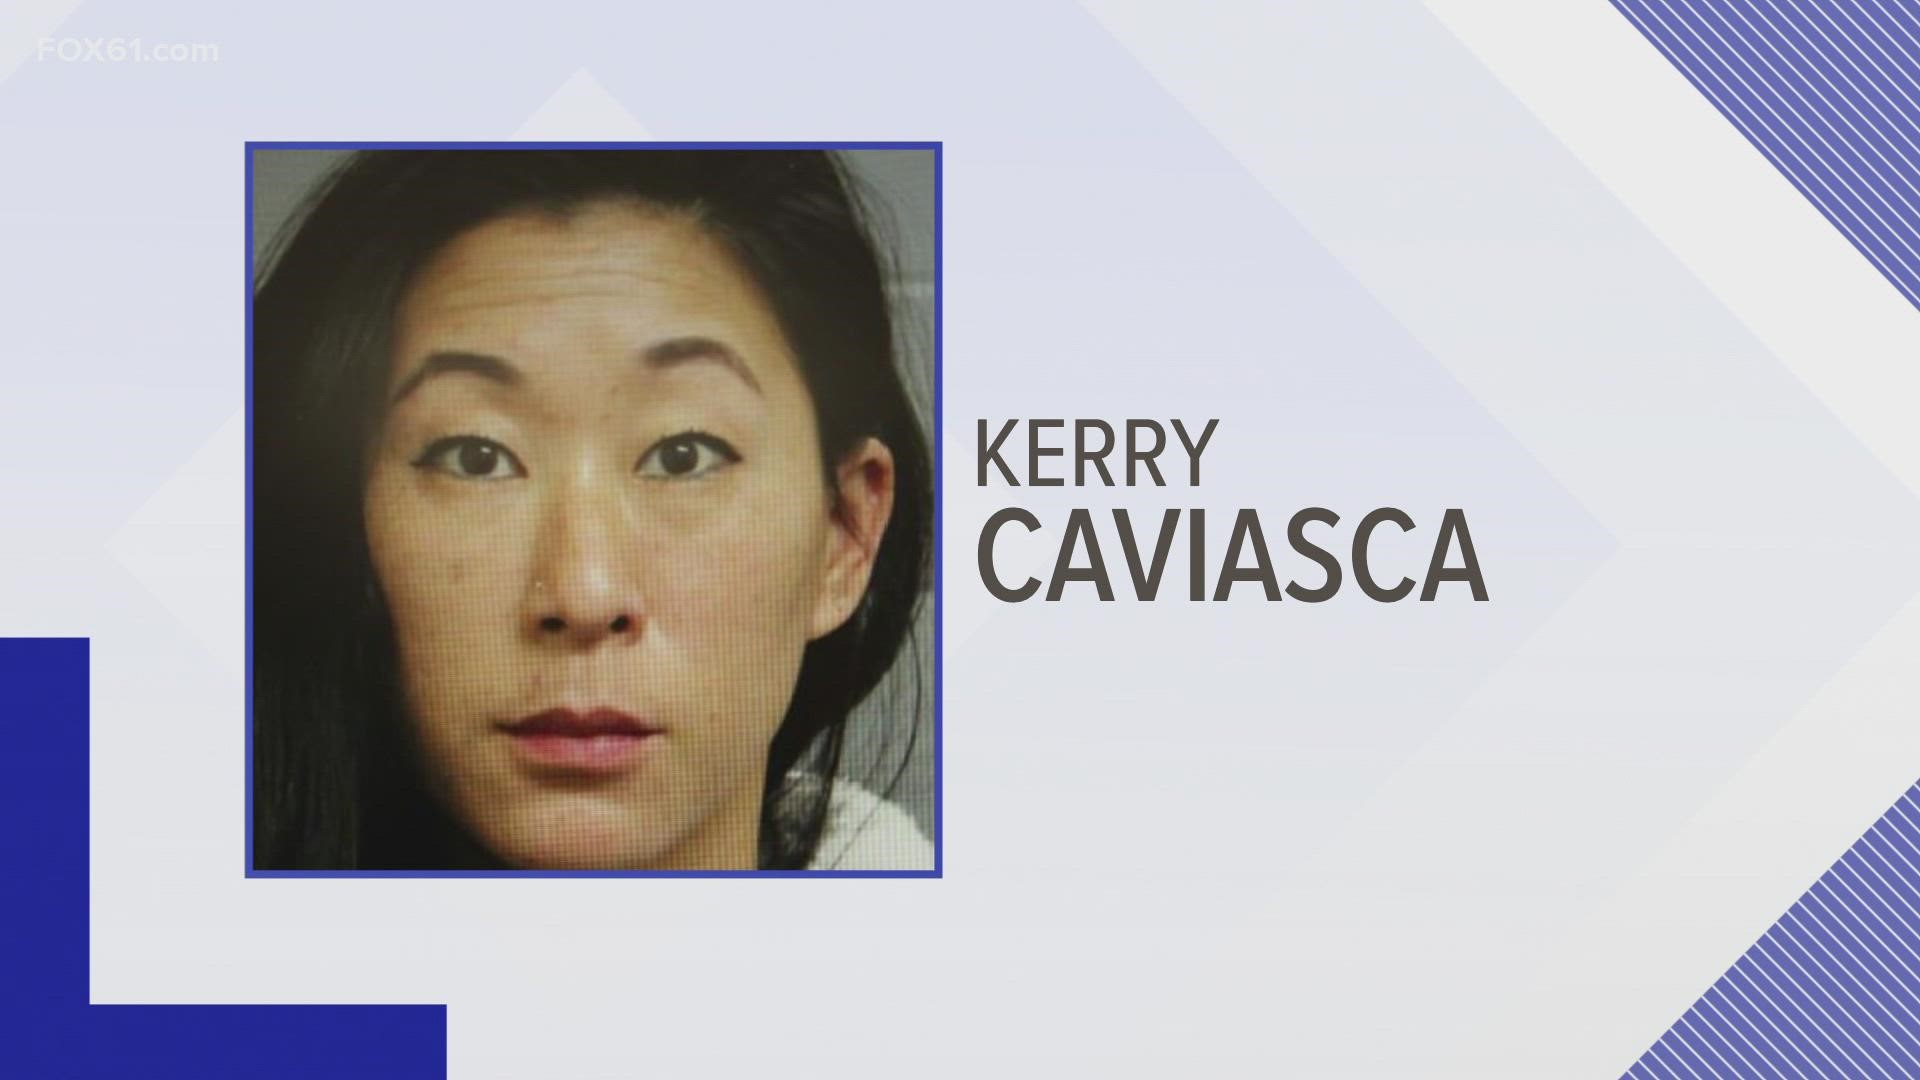 A Waterbury Public Schools employee is facing charges for allegedly leaving two kids in her care home alone for two days and nights while out of state, police said.